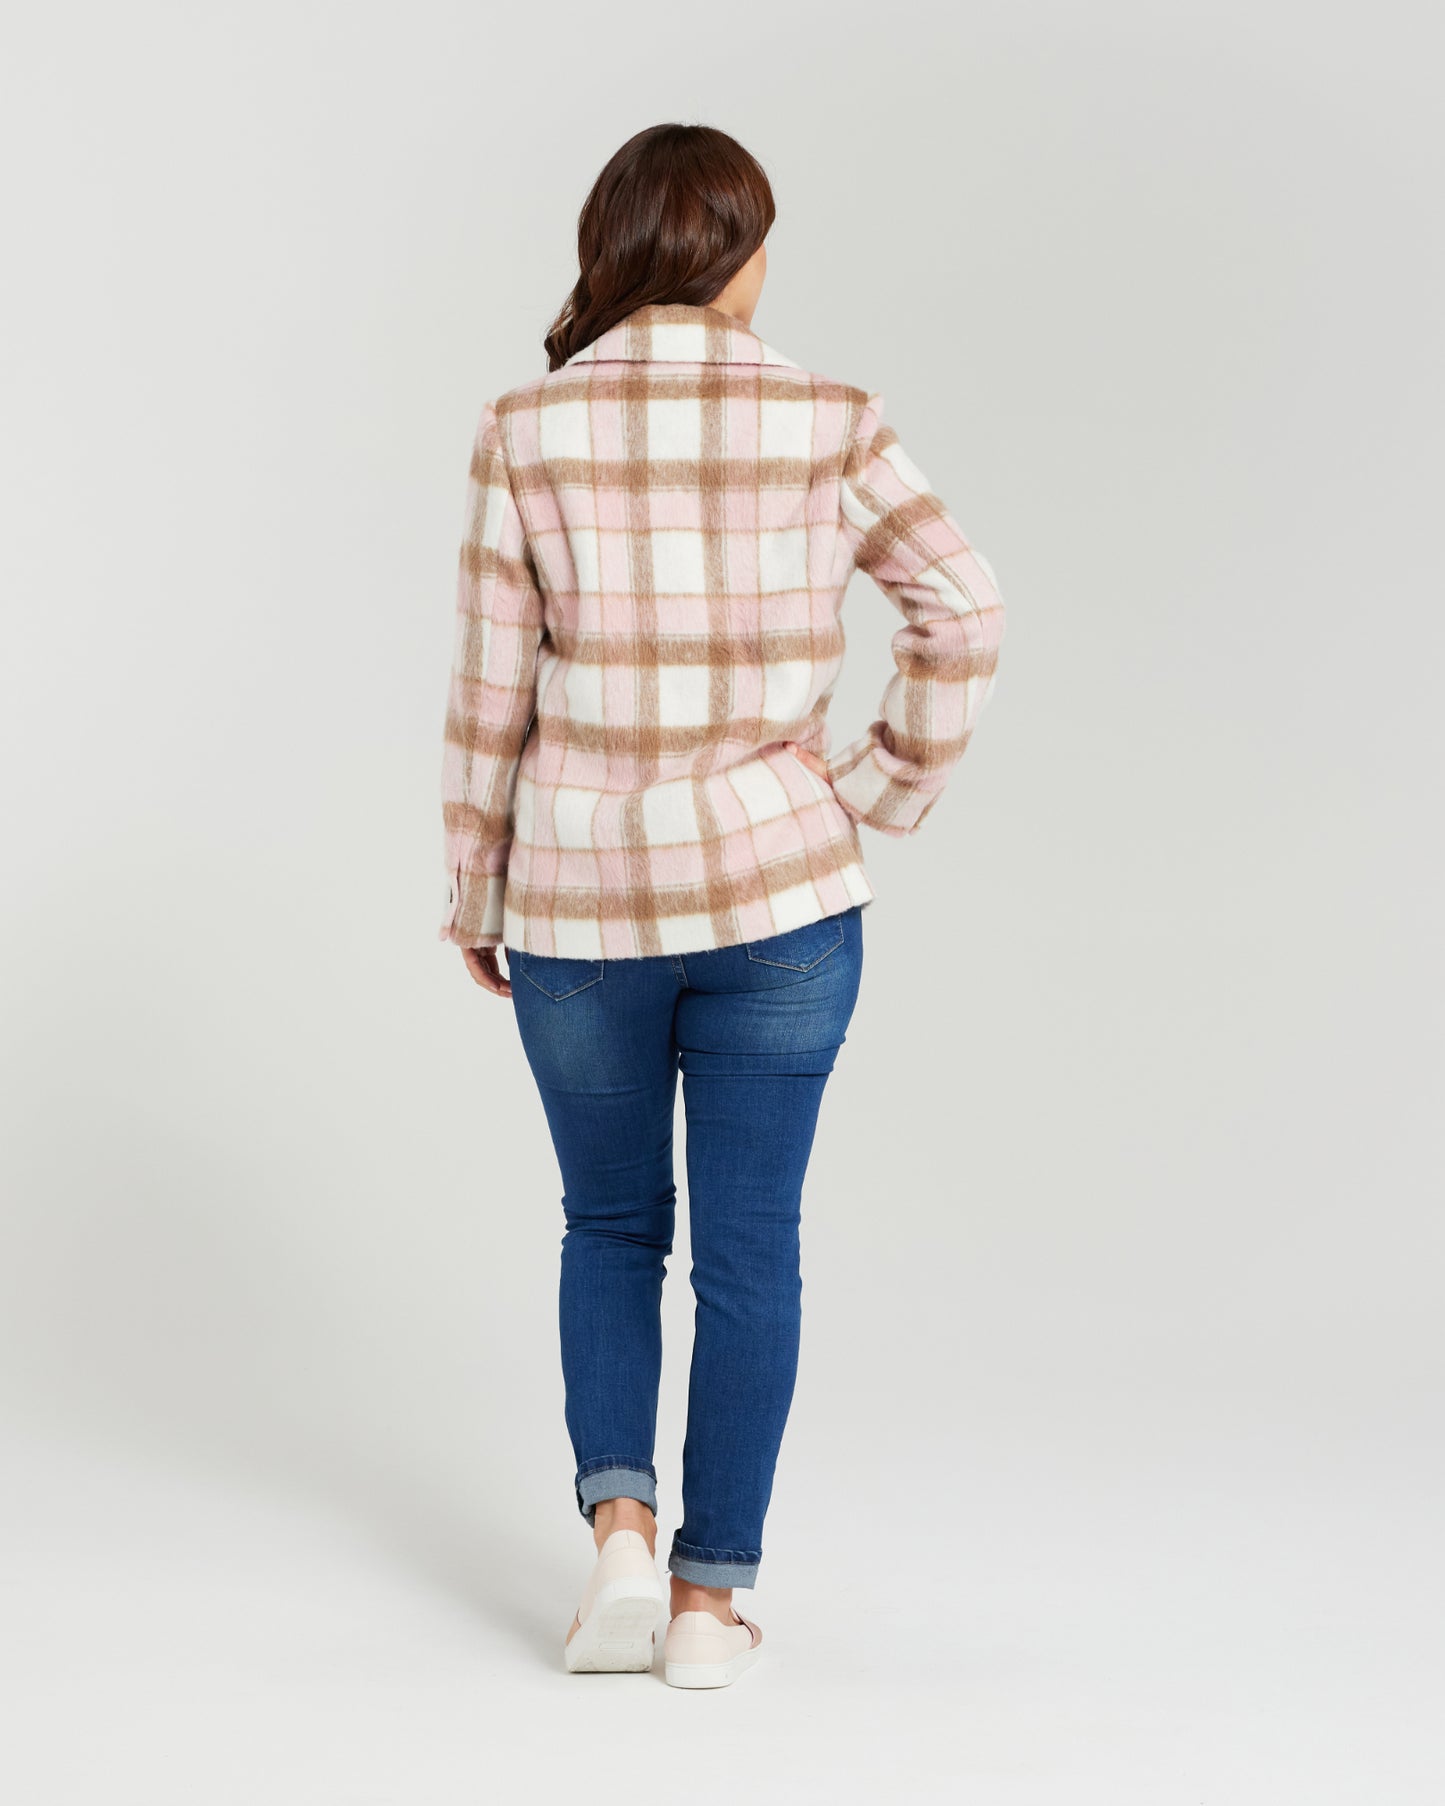 Zafina - Veda Jacket - Fluffy Plaid - Due 1st March